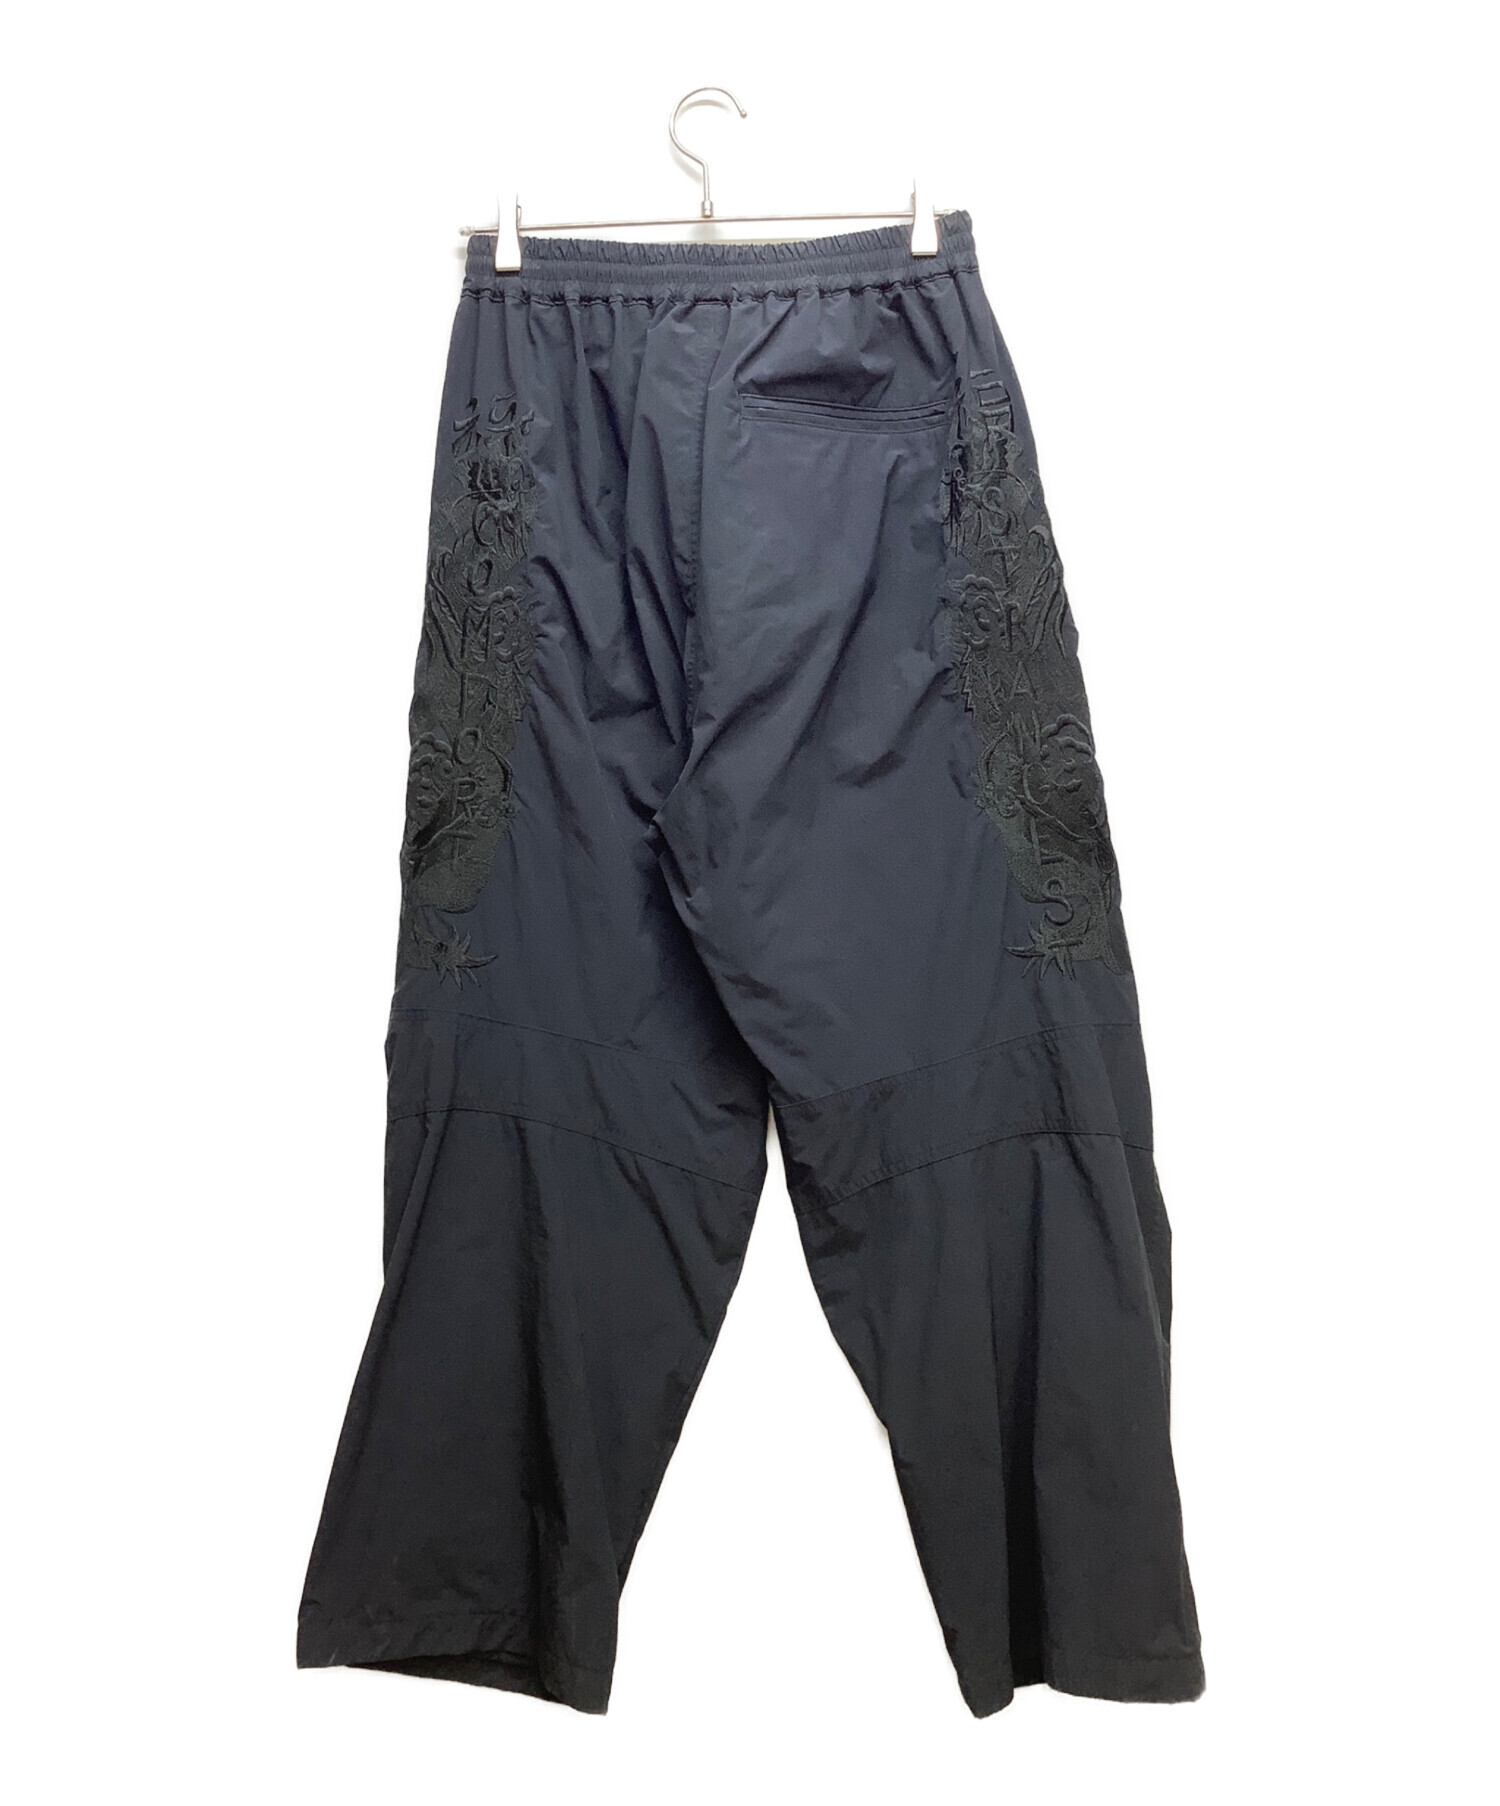 doublet (ダブレット) CHAOS EMBROIDERY TRACK PANTS ブラック サイズ:M